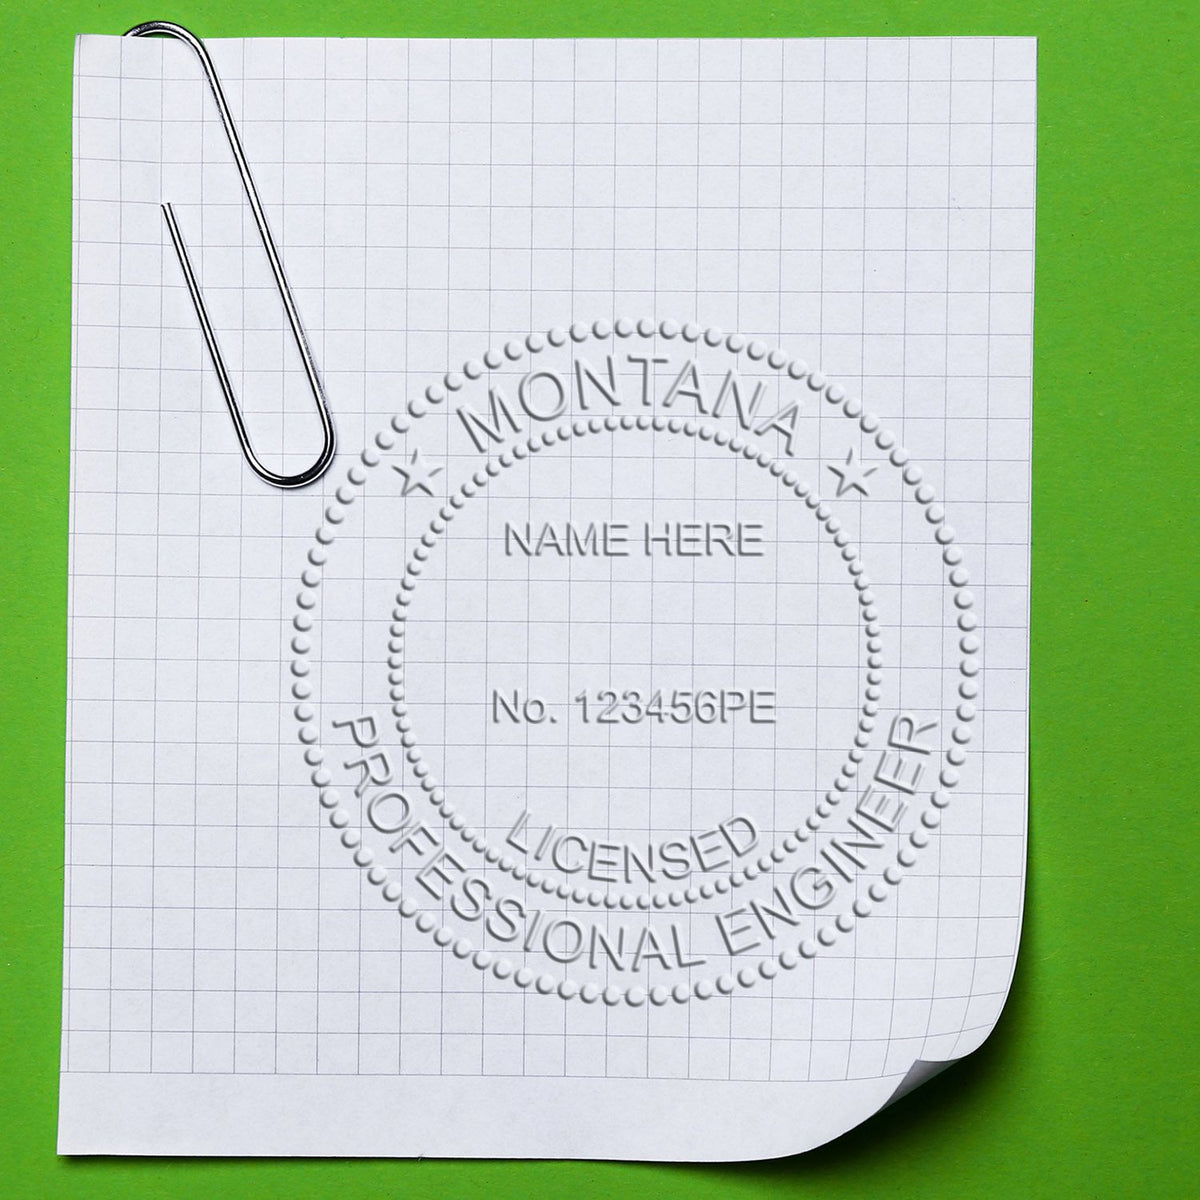 An in use photo of the Hybrid Montana Engineer Seal showing a sample imprint on a cardstock